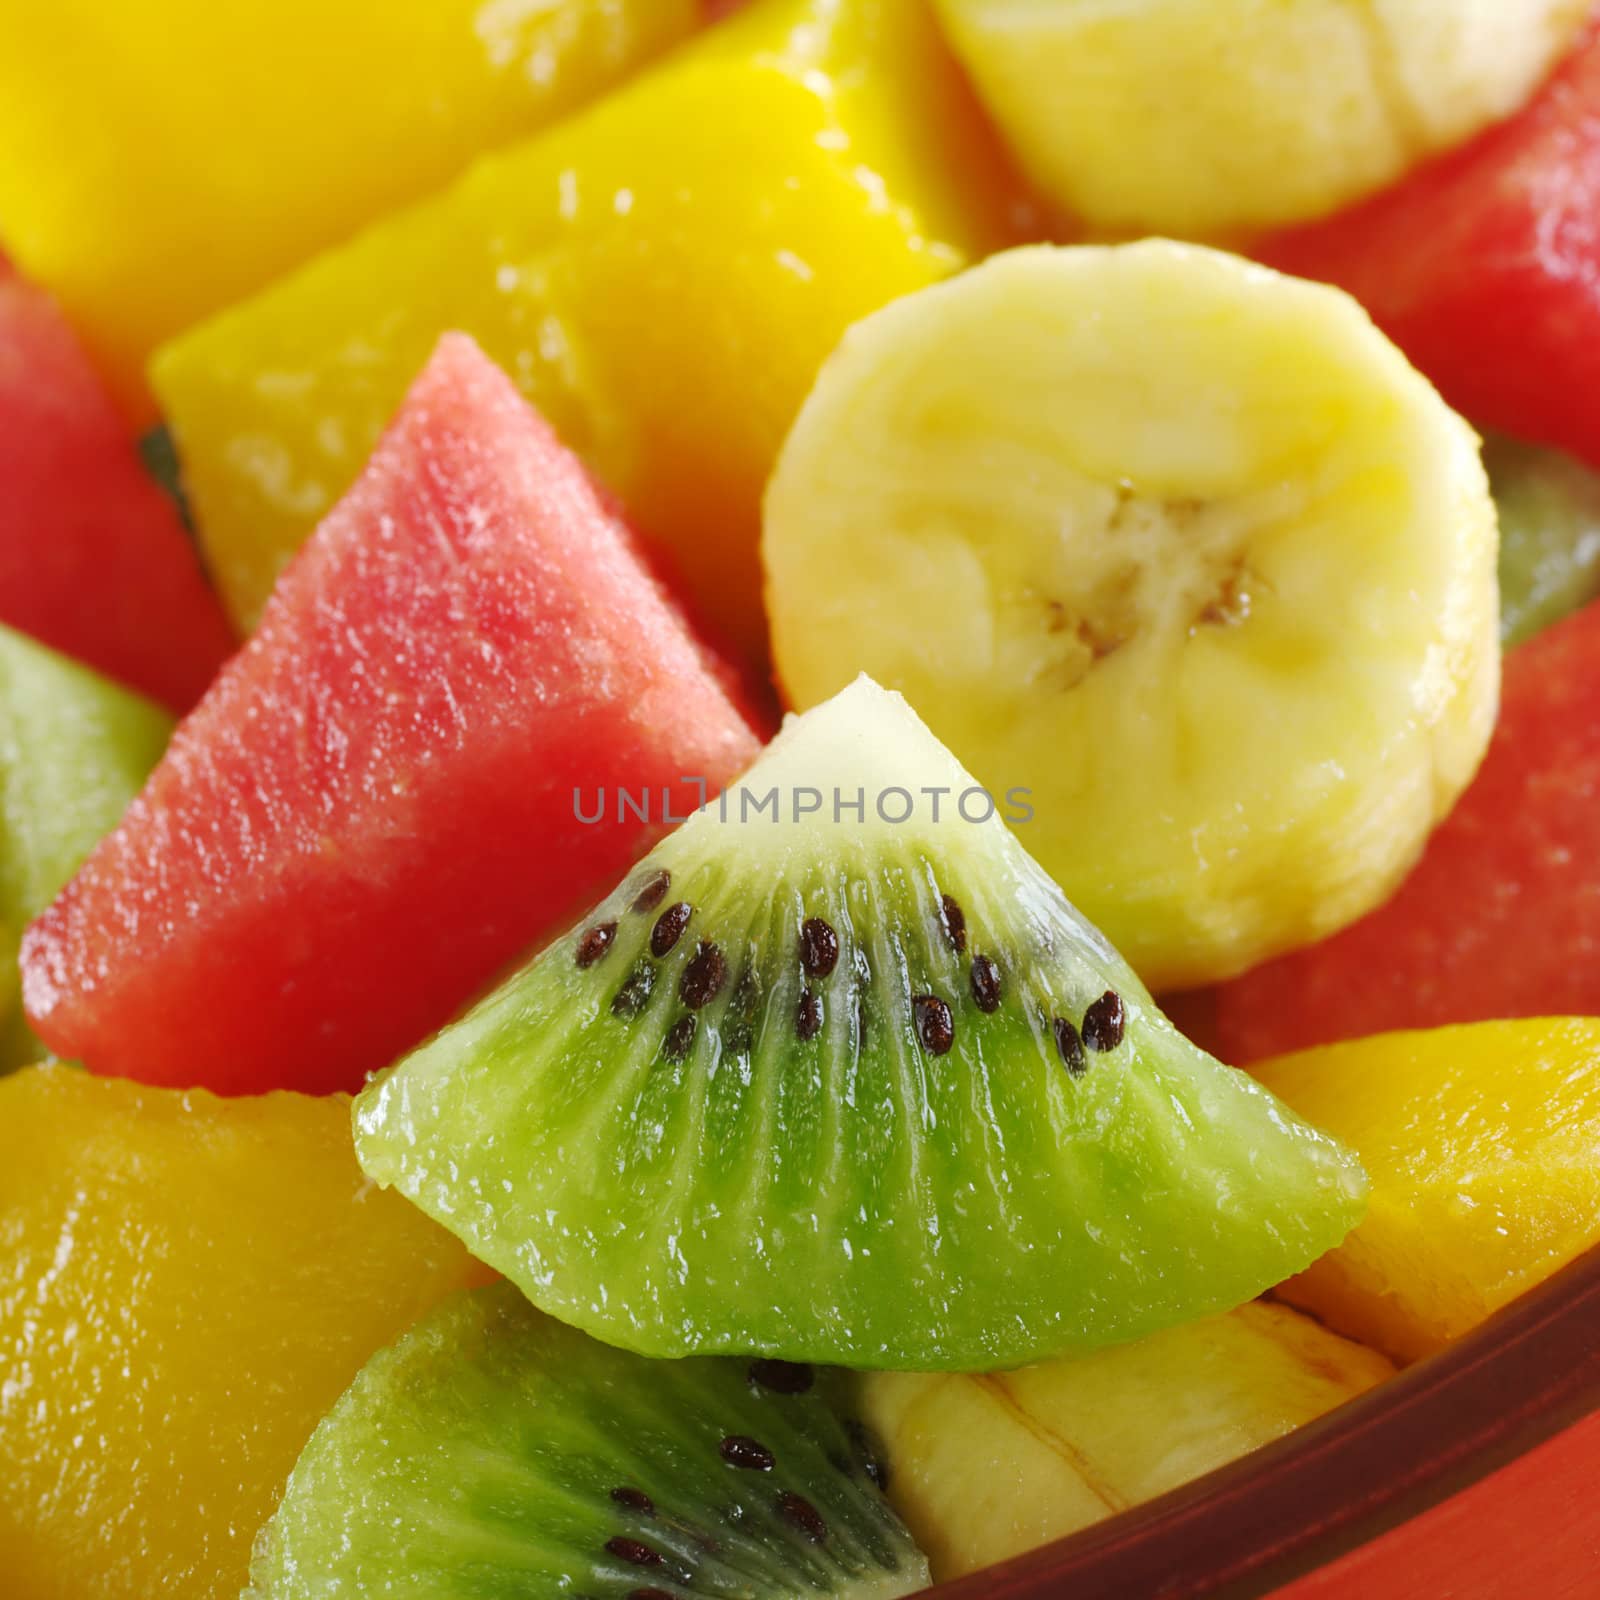 Fresh and healthy tropical fruit salad out of kiwi, mango, banana and watermelon pieces in an orange bowl (Selective Focus, Focus on the kiwi slice)